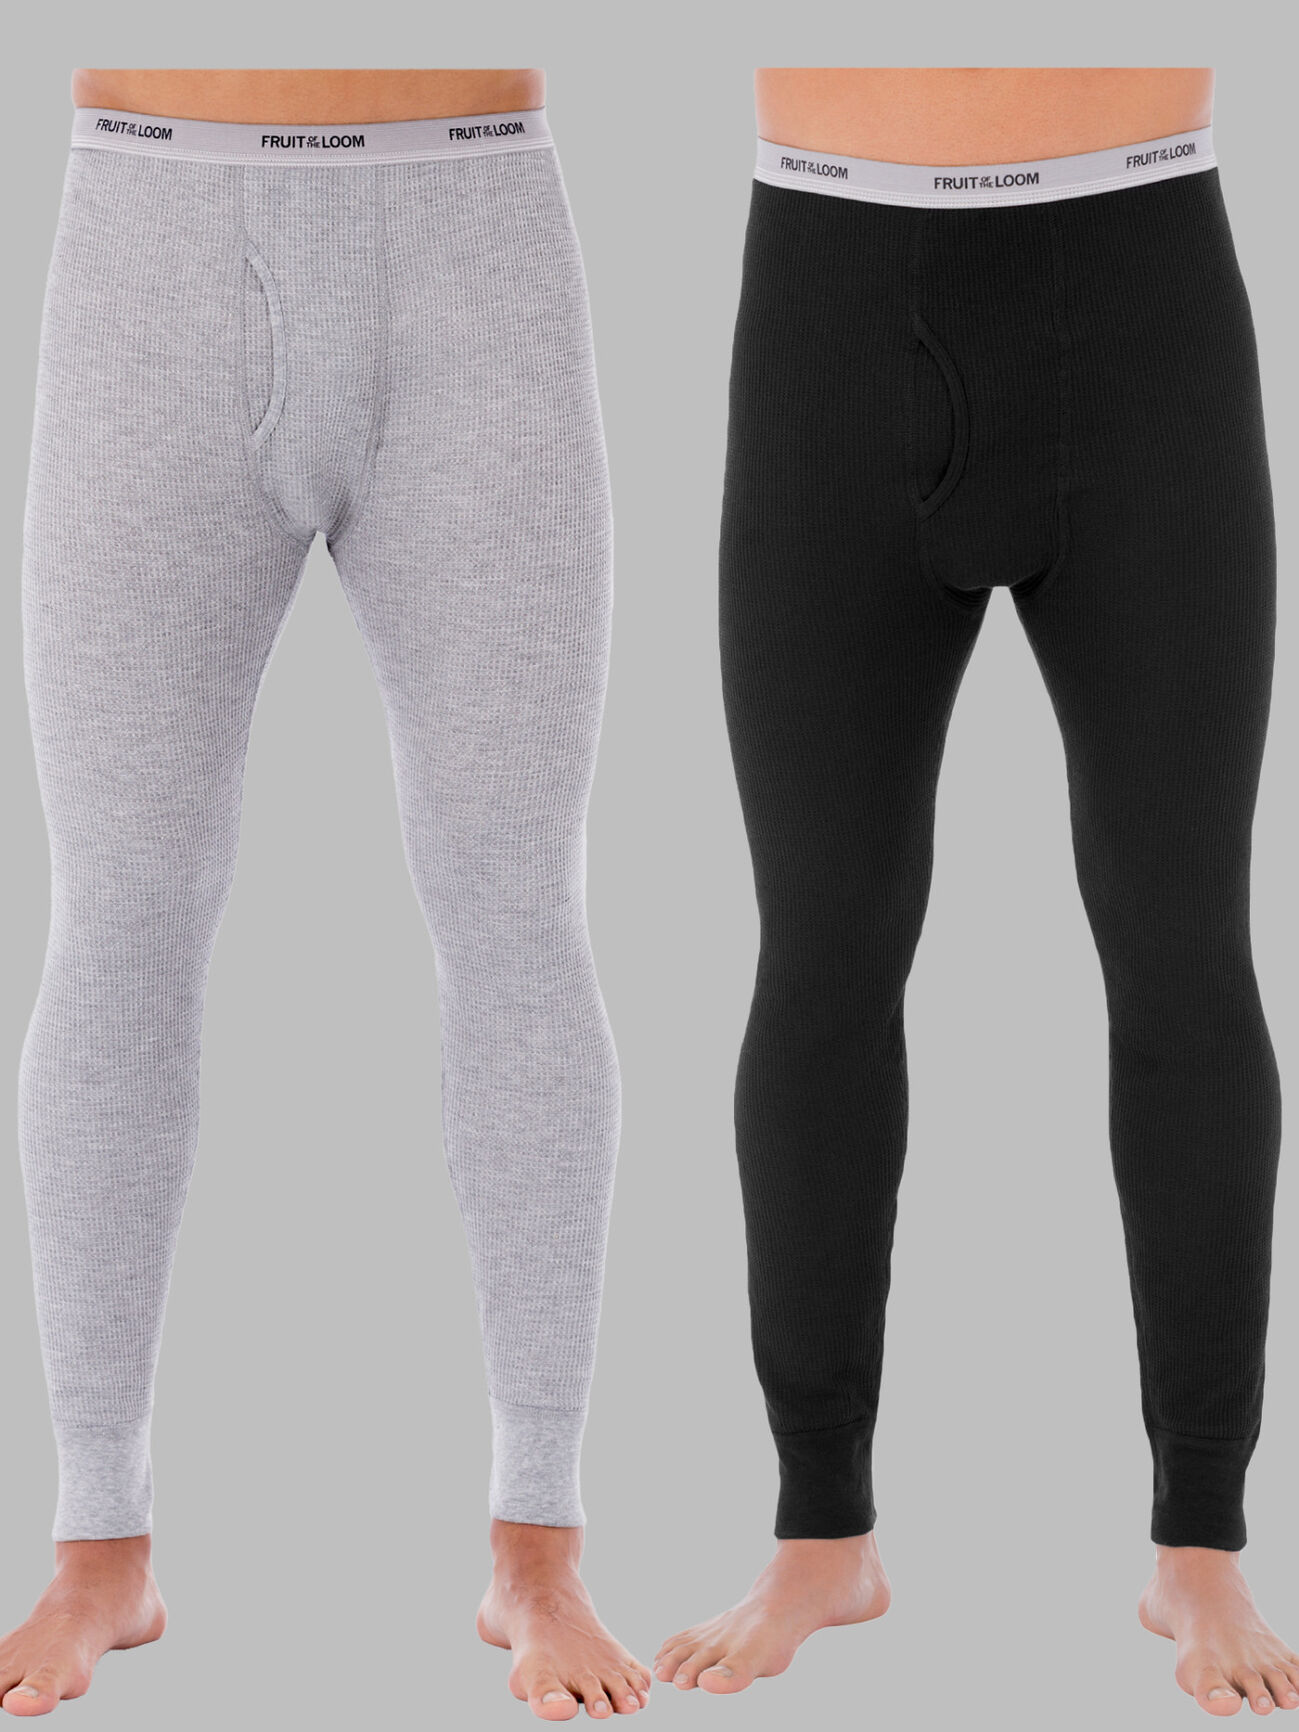 3-pack Men's thermal long johns 100% cotton fleecy